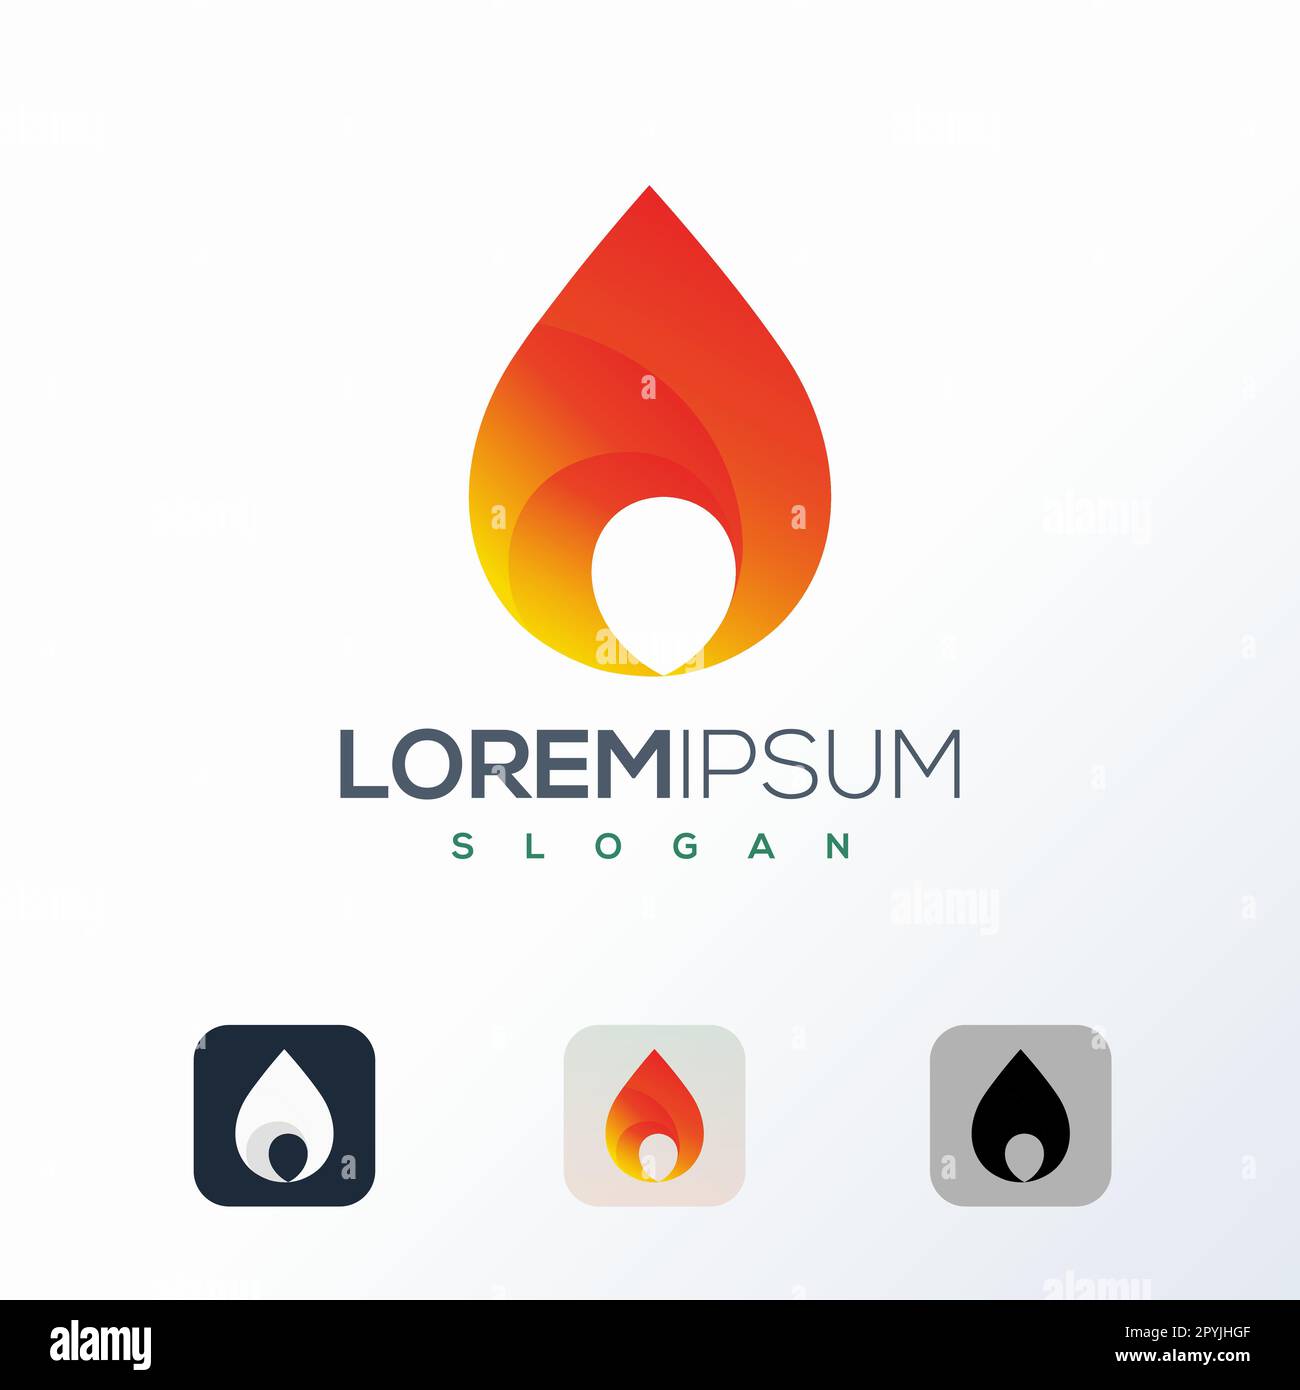 Fire logo design template. Vector illustration. Red, orange and black colors. Stock Vector